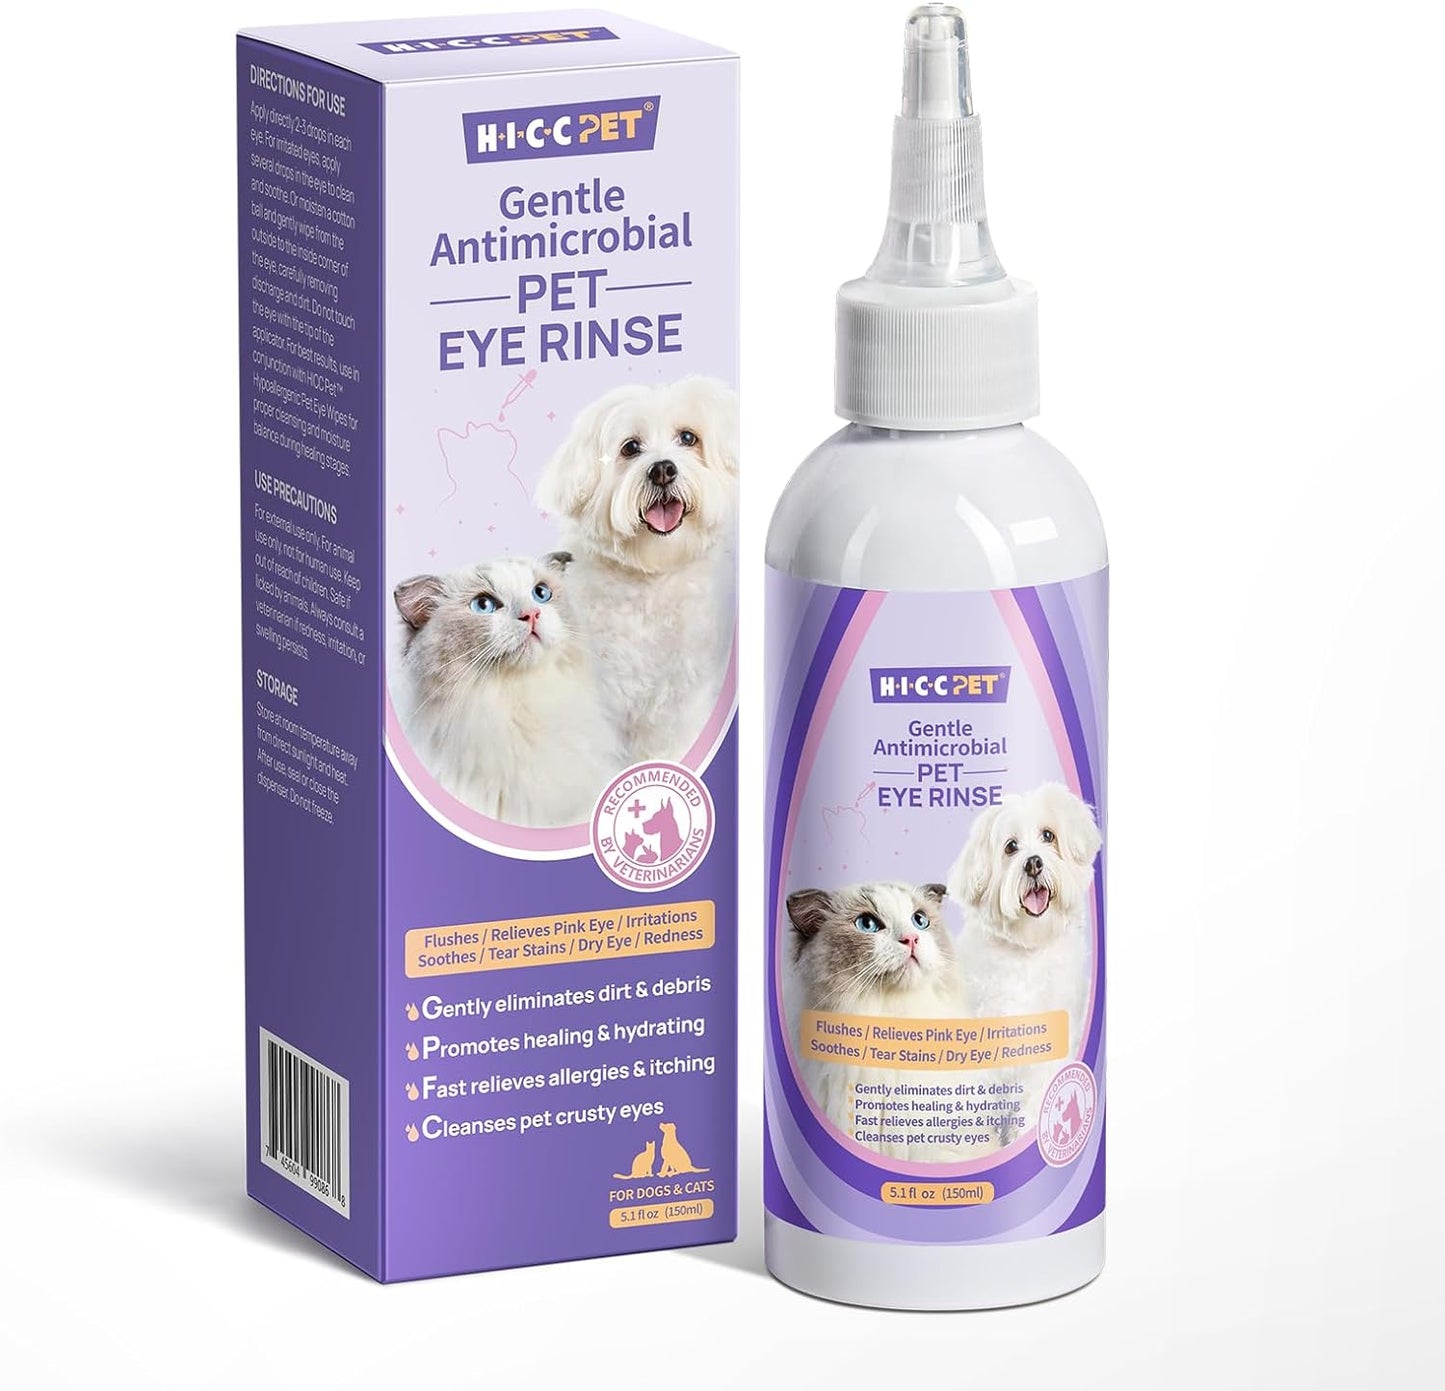 Eye Drops for Dogs and Cats: Gentle Formula Dog Eye Drops, Flush & Soothe Eye Irritations - Remove Tear Stains - Improves Allergy Symptoms & Dry Eyes - Safe for All Animals, 5.1oz